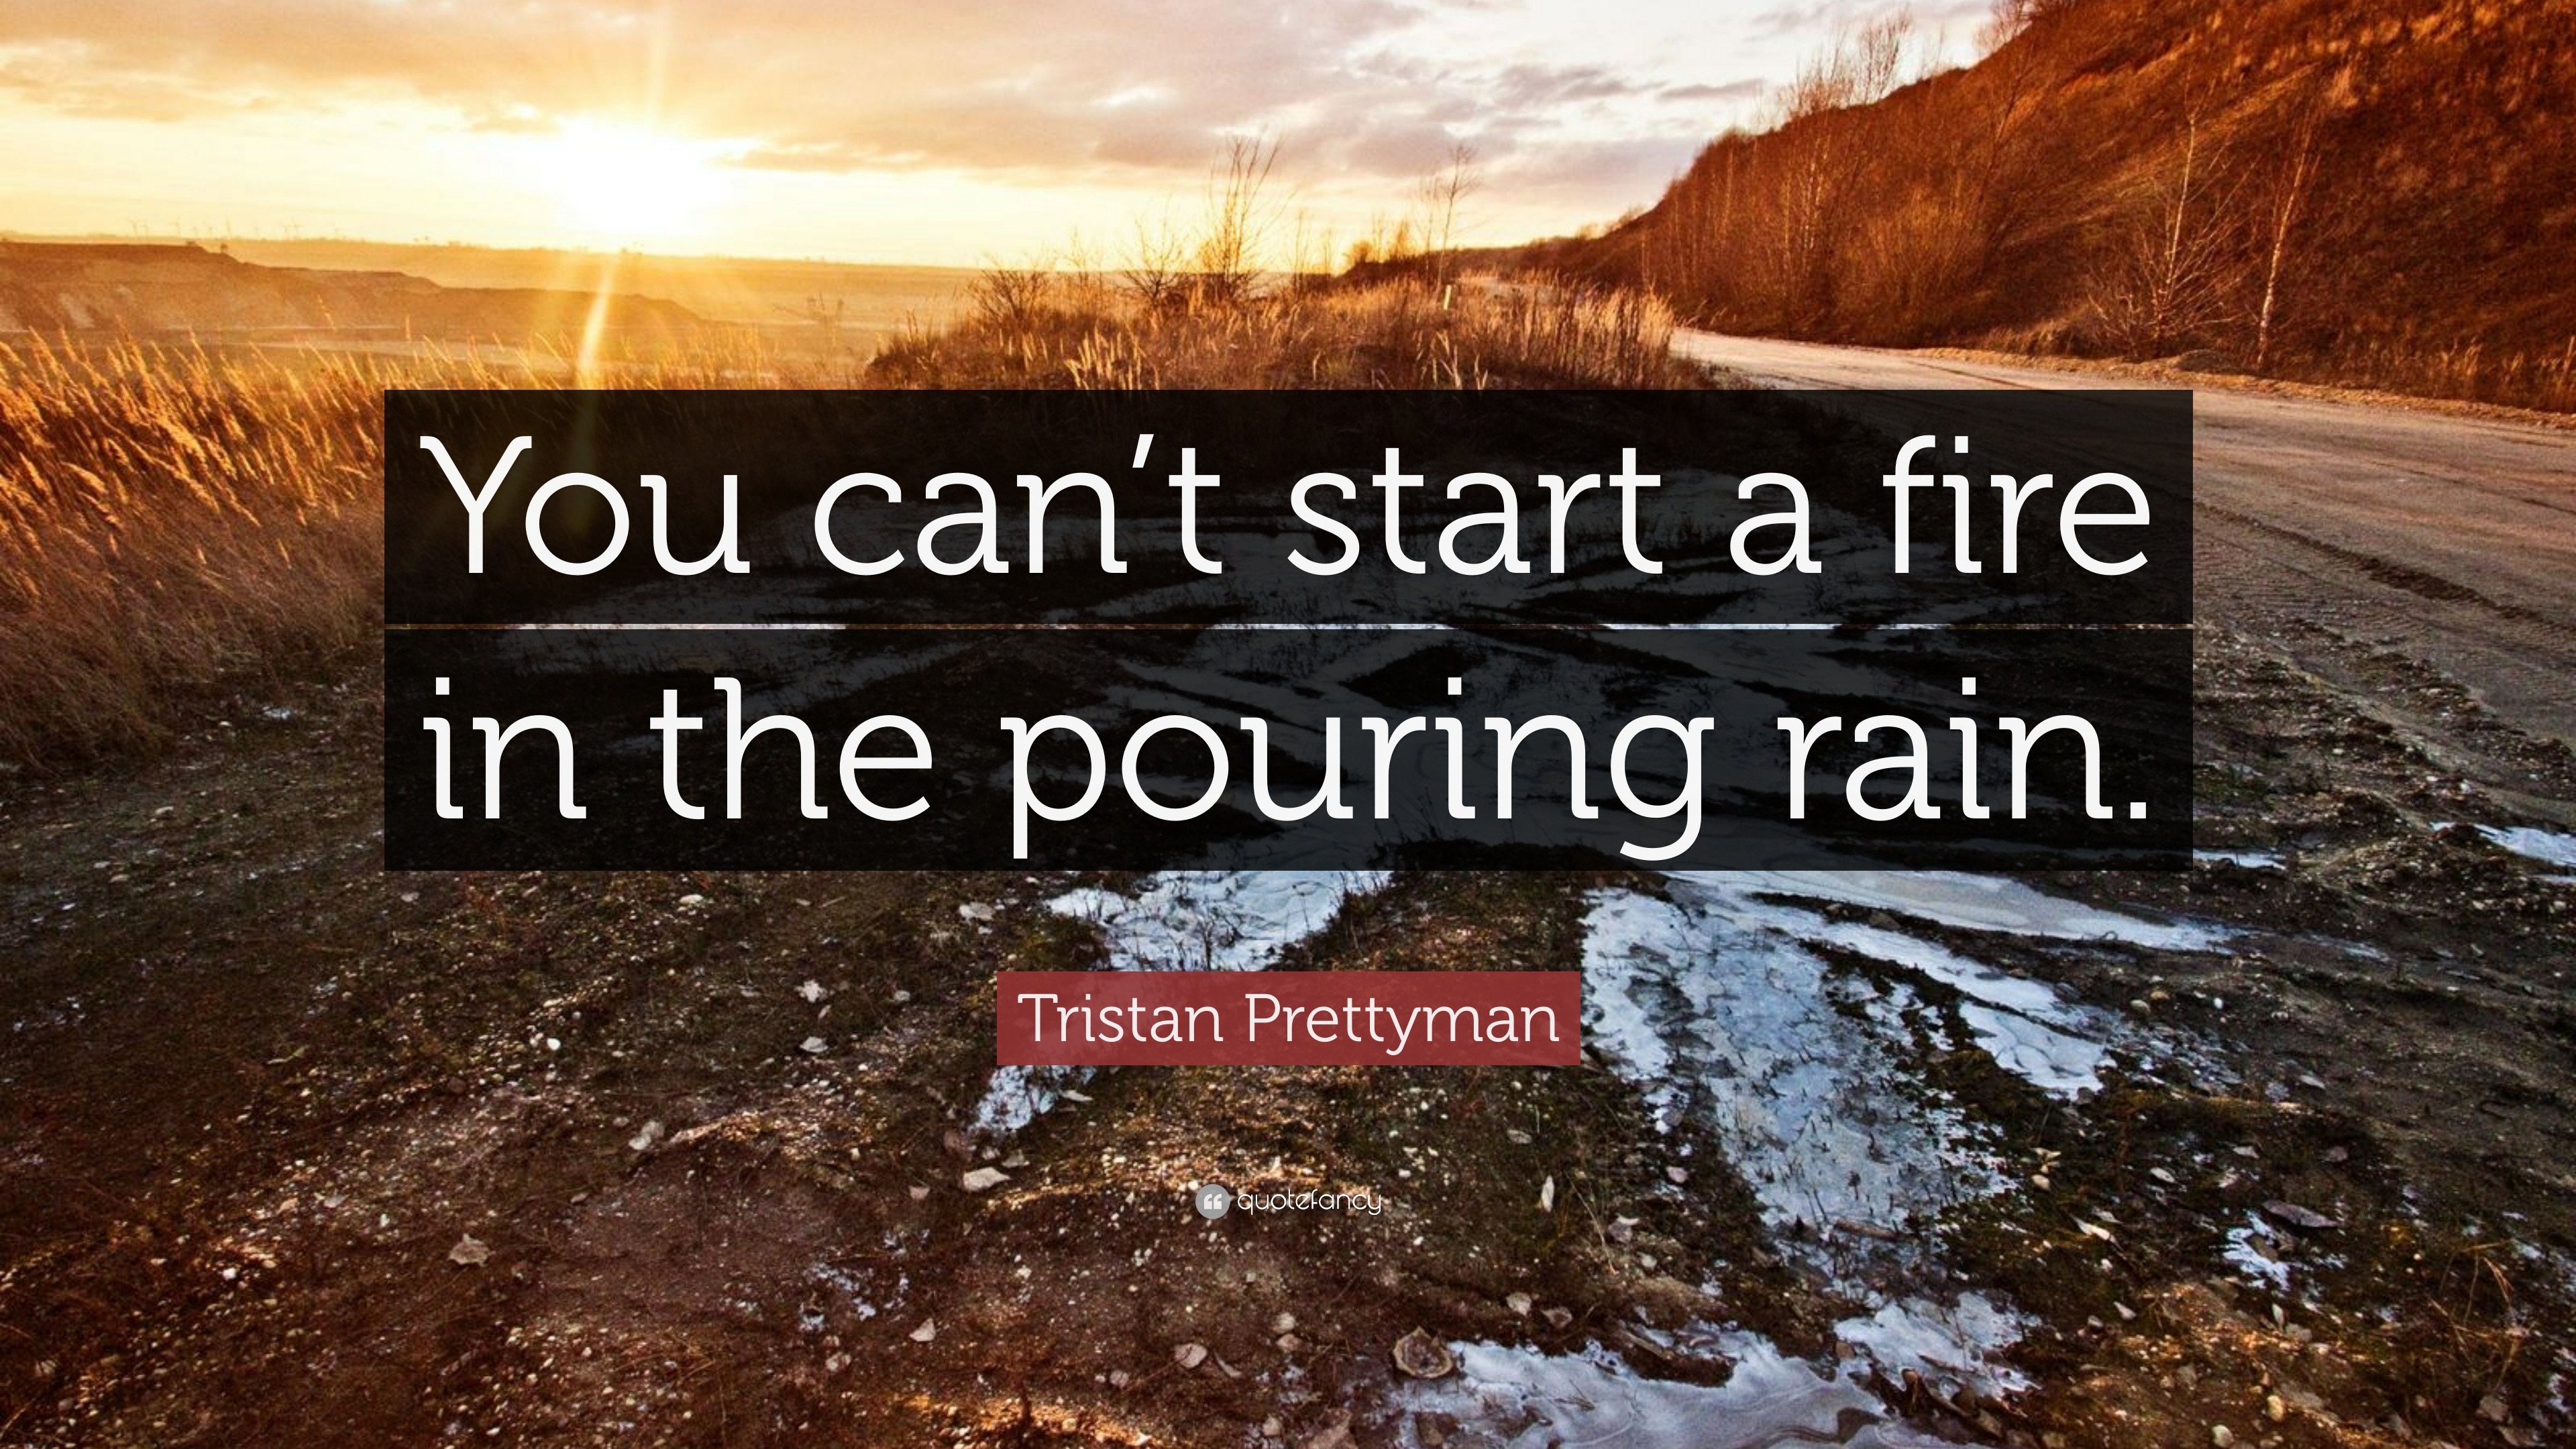 https://quotefancy.com/media/wallpaper/3840x2160/1262818-Tristan-Prettyman-Quote-You-can-t-start-a-fire-in-the-pouring-rain.jpg